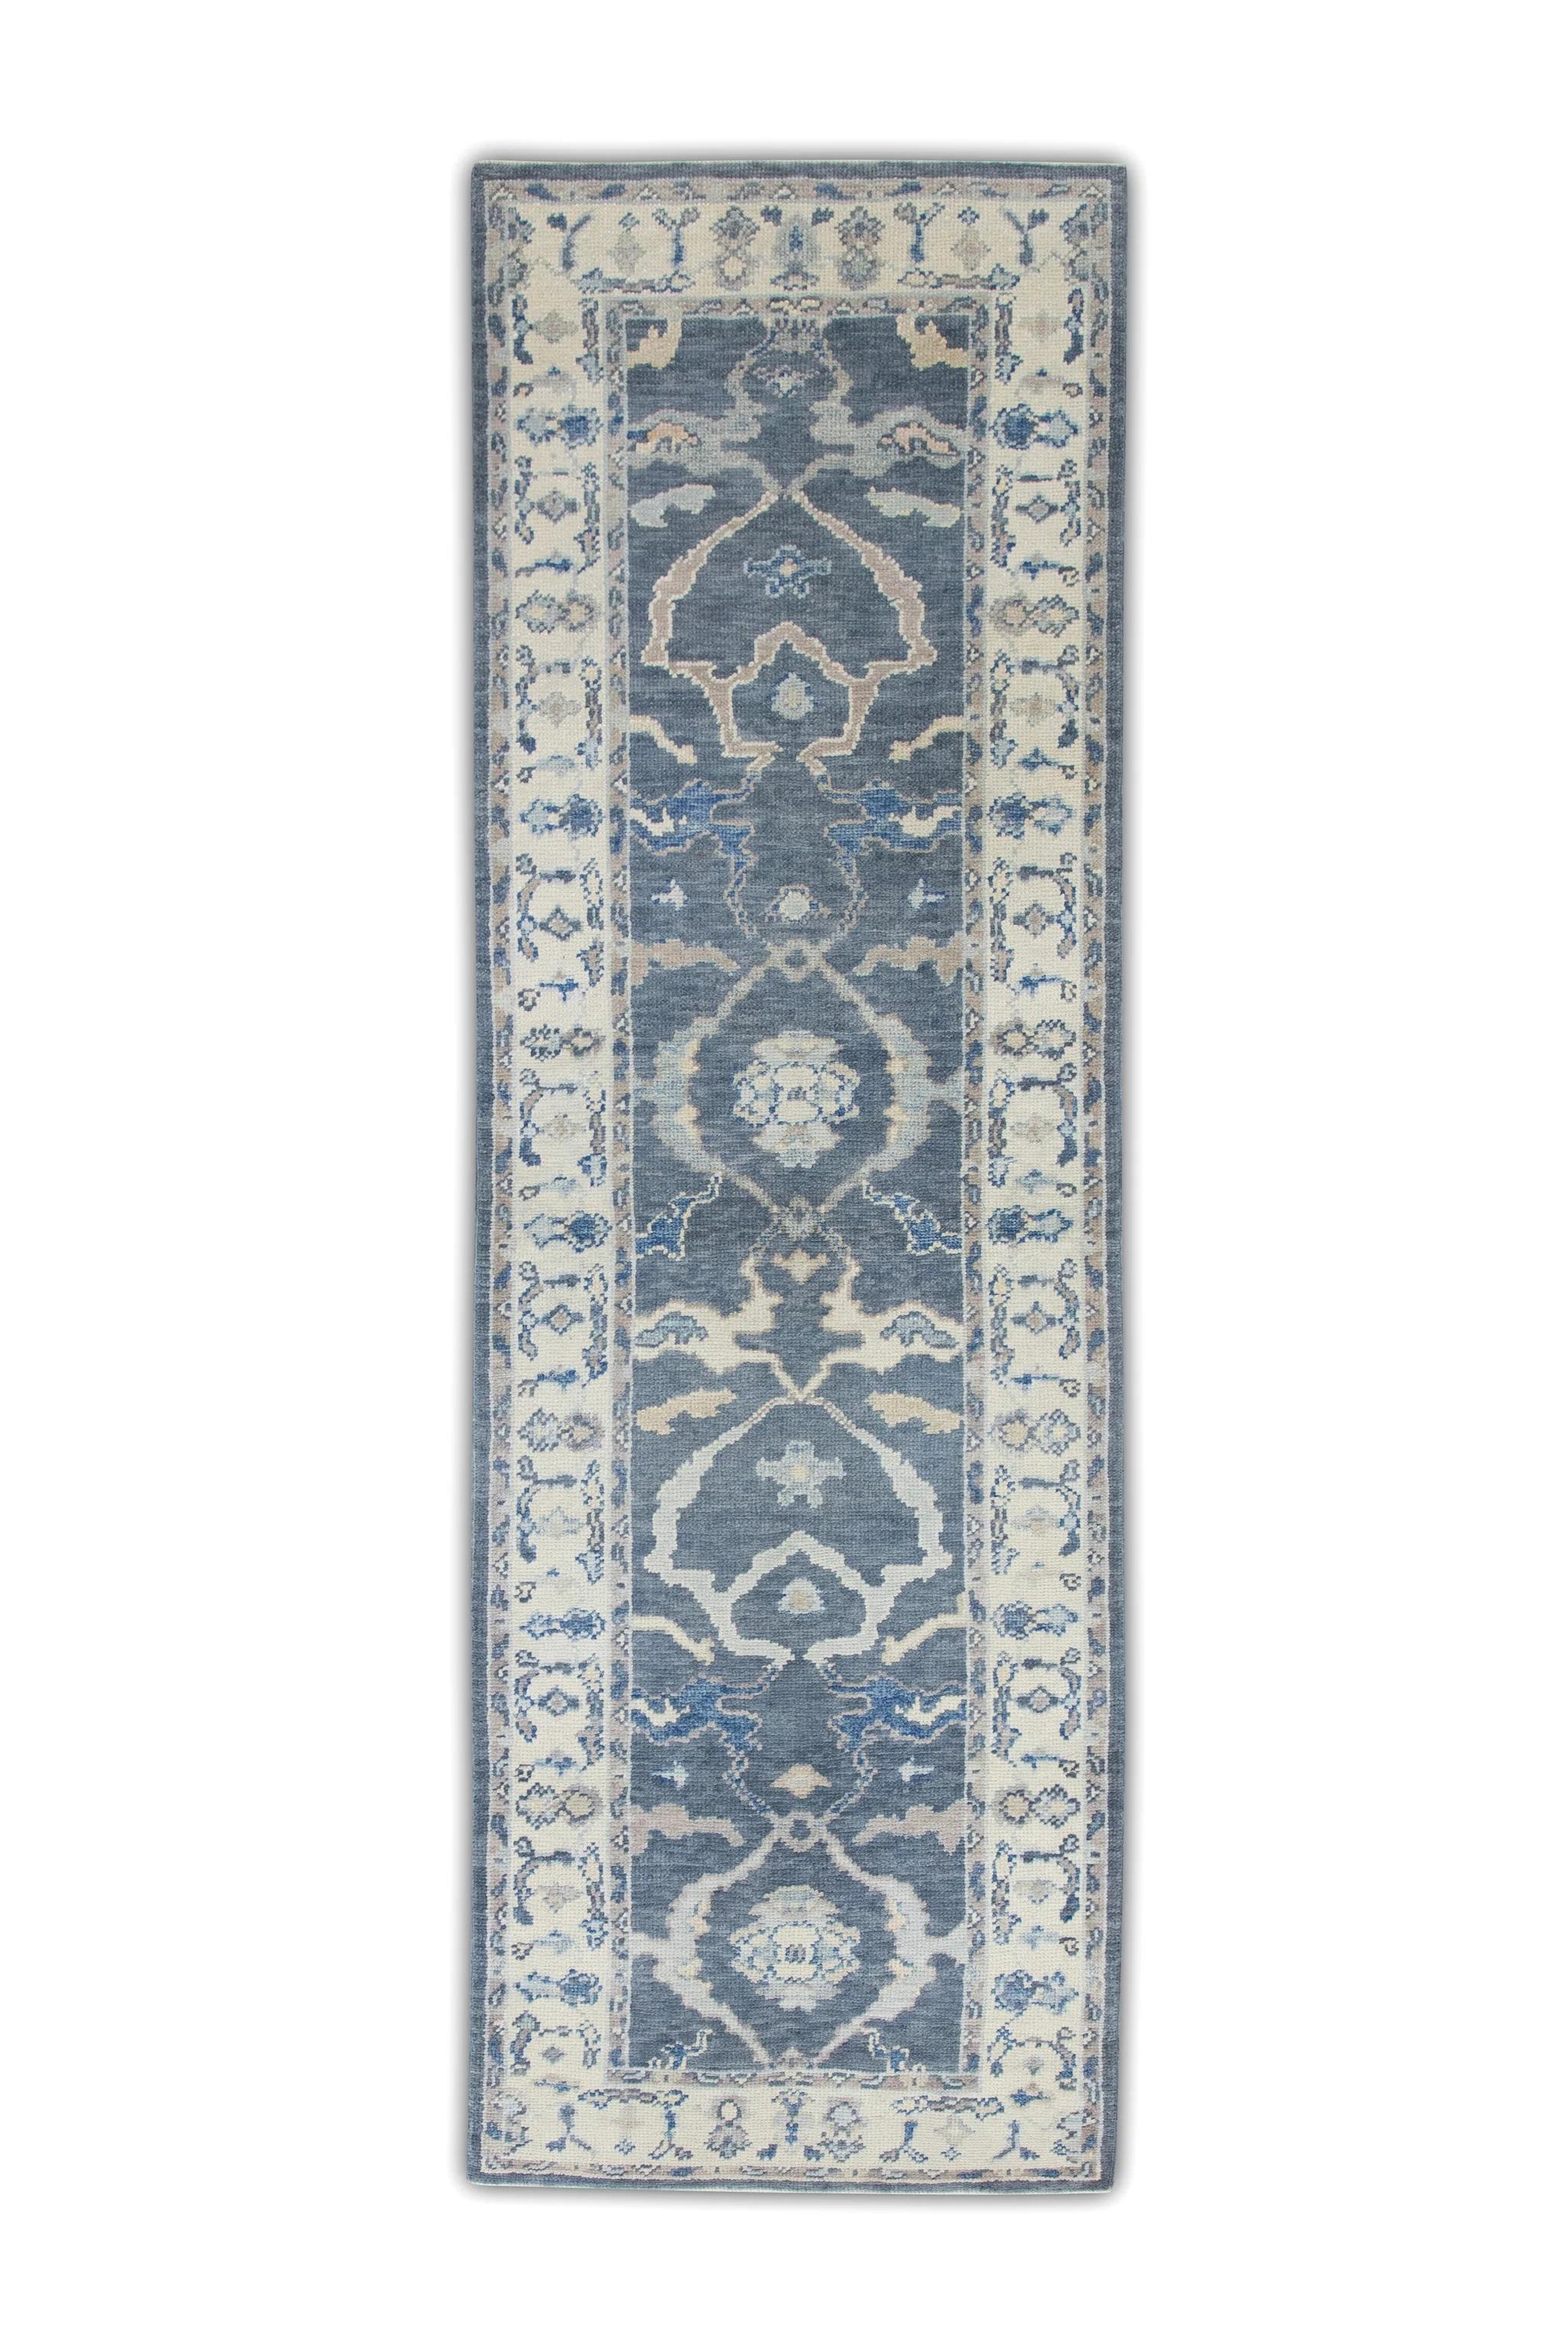 Contemporary Blue Handwoven Wool Turkish Oushak Rug in Pink Floral Design 2'11